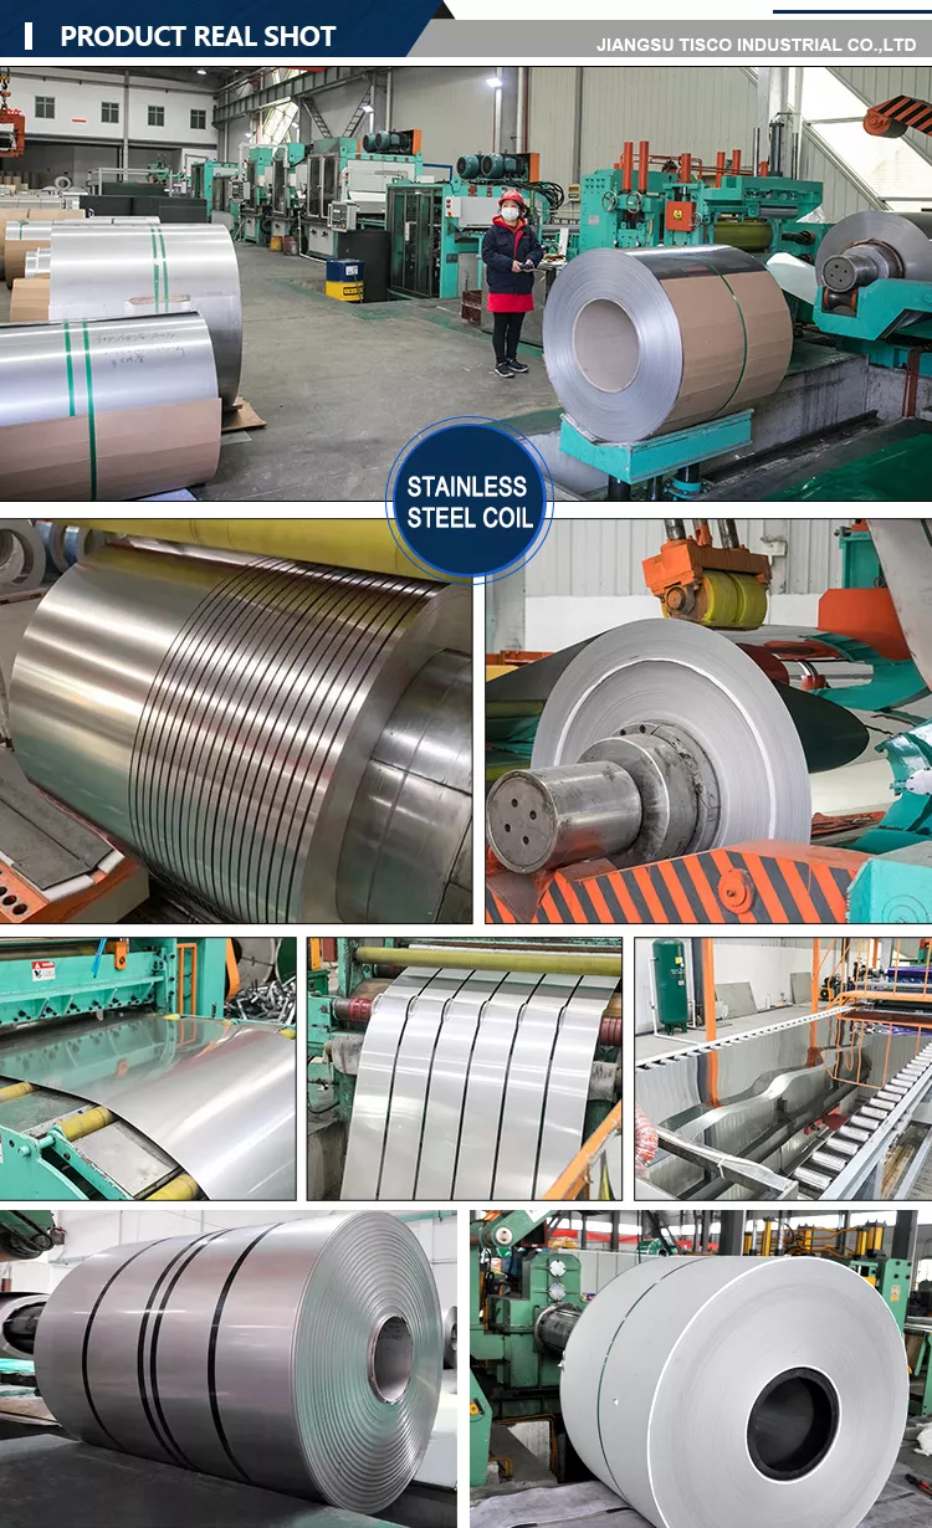 Image of 309 309S Stainless Steel Coil